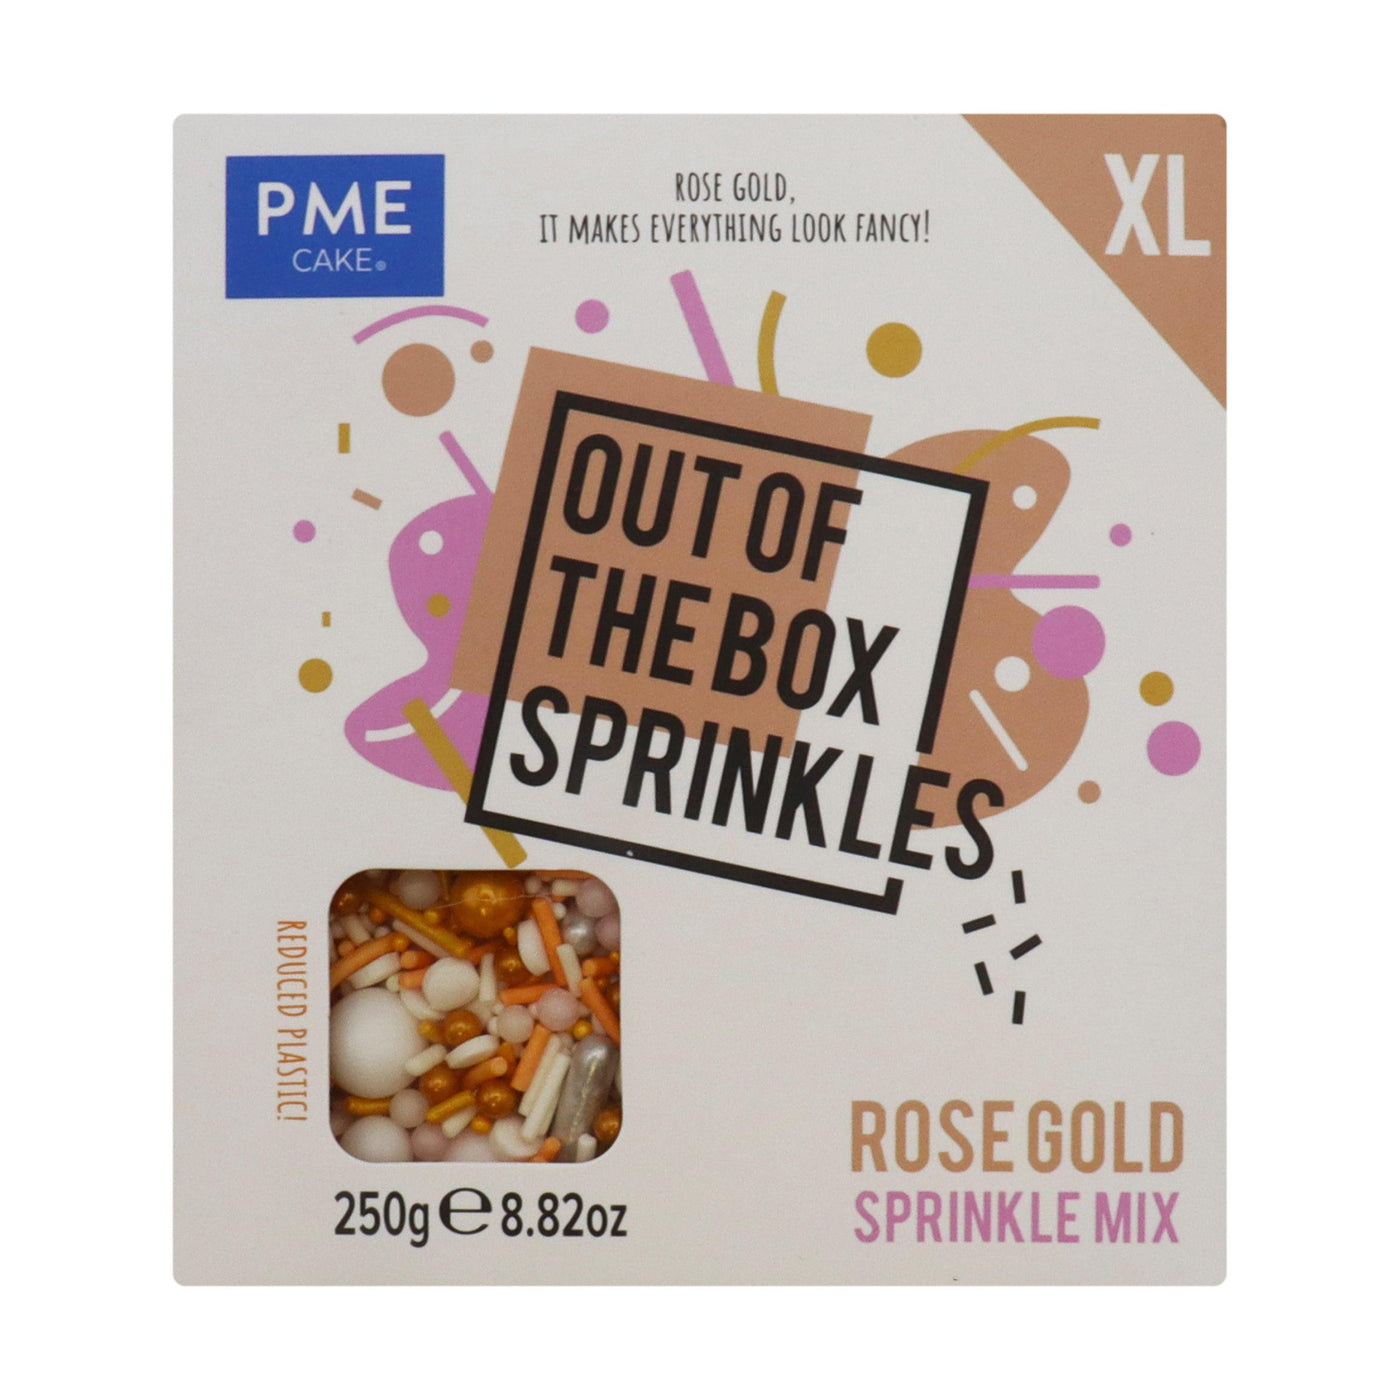 Out of the Box Sprinkles - Rose Gold - PME